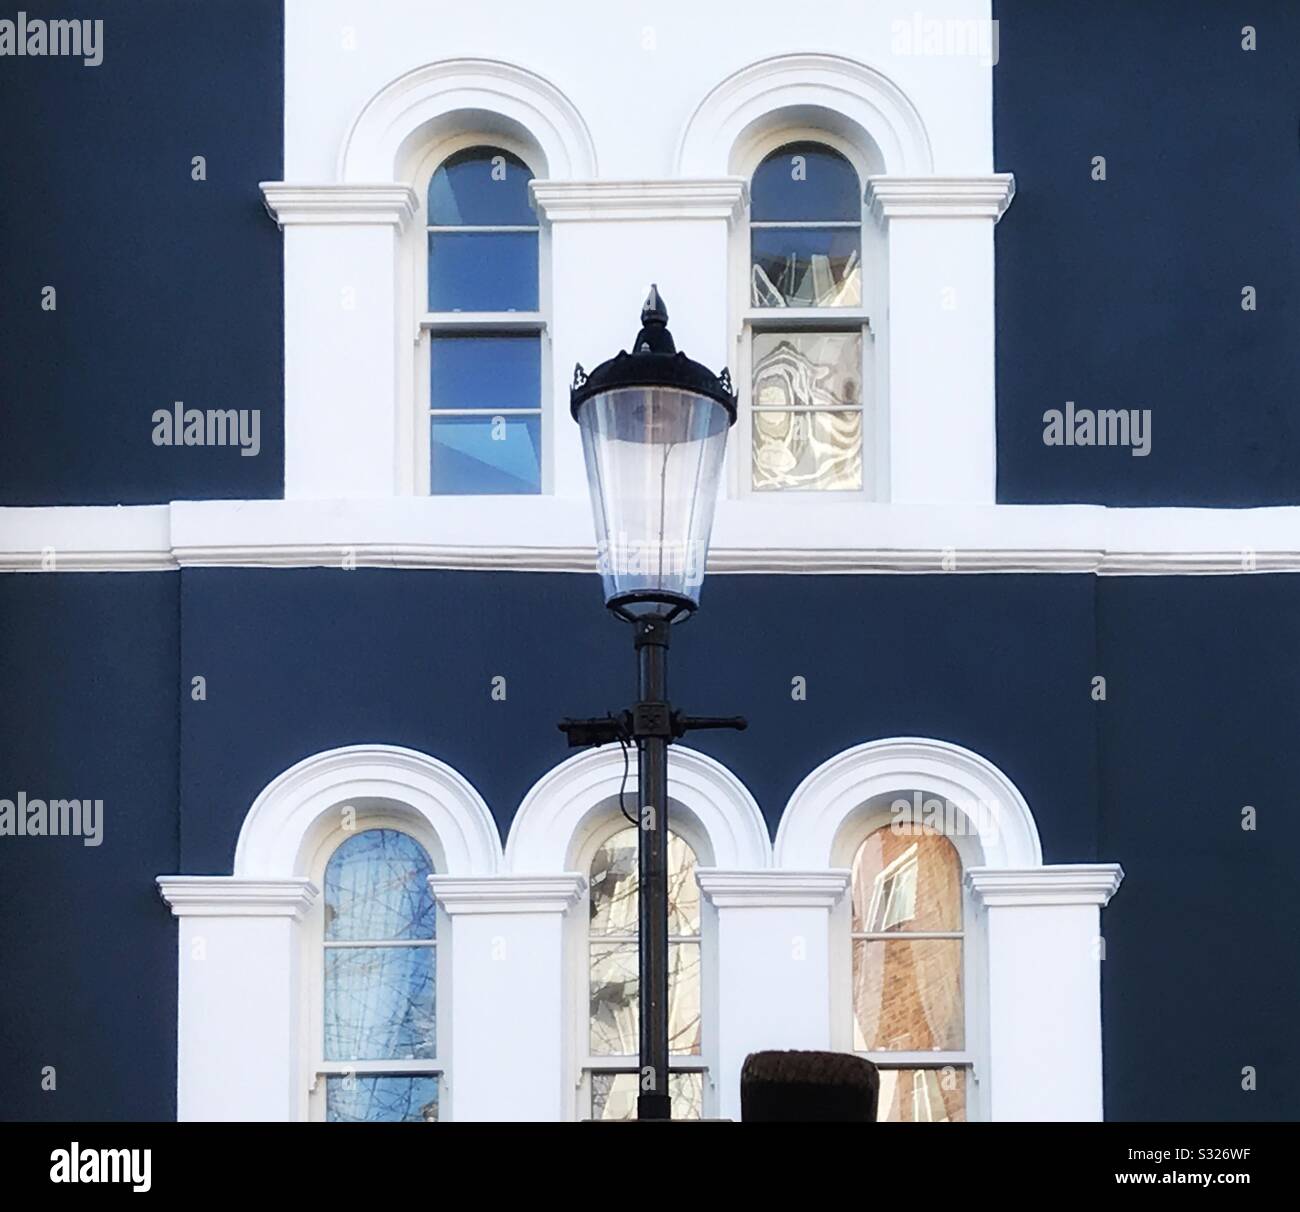 A street lamp in front of a house in London’s Portobello Road Notting Hill is in keeping with the architectural style as illustrated by the windows and and painted facade in the background Stock Photo